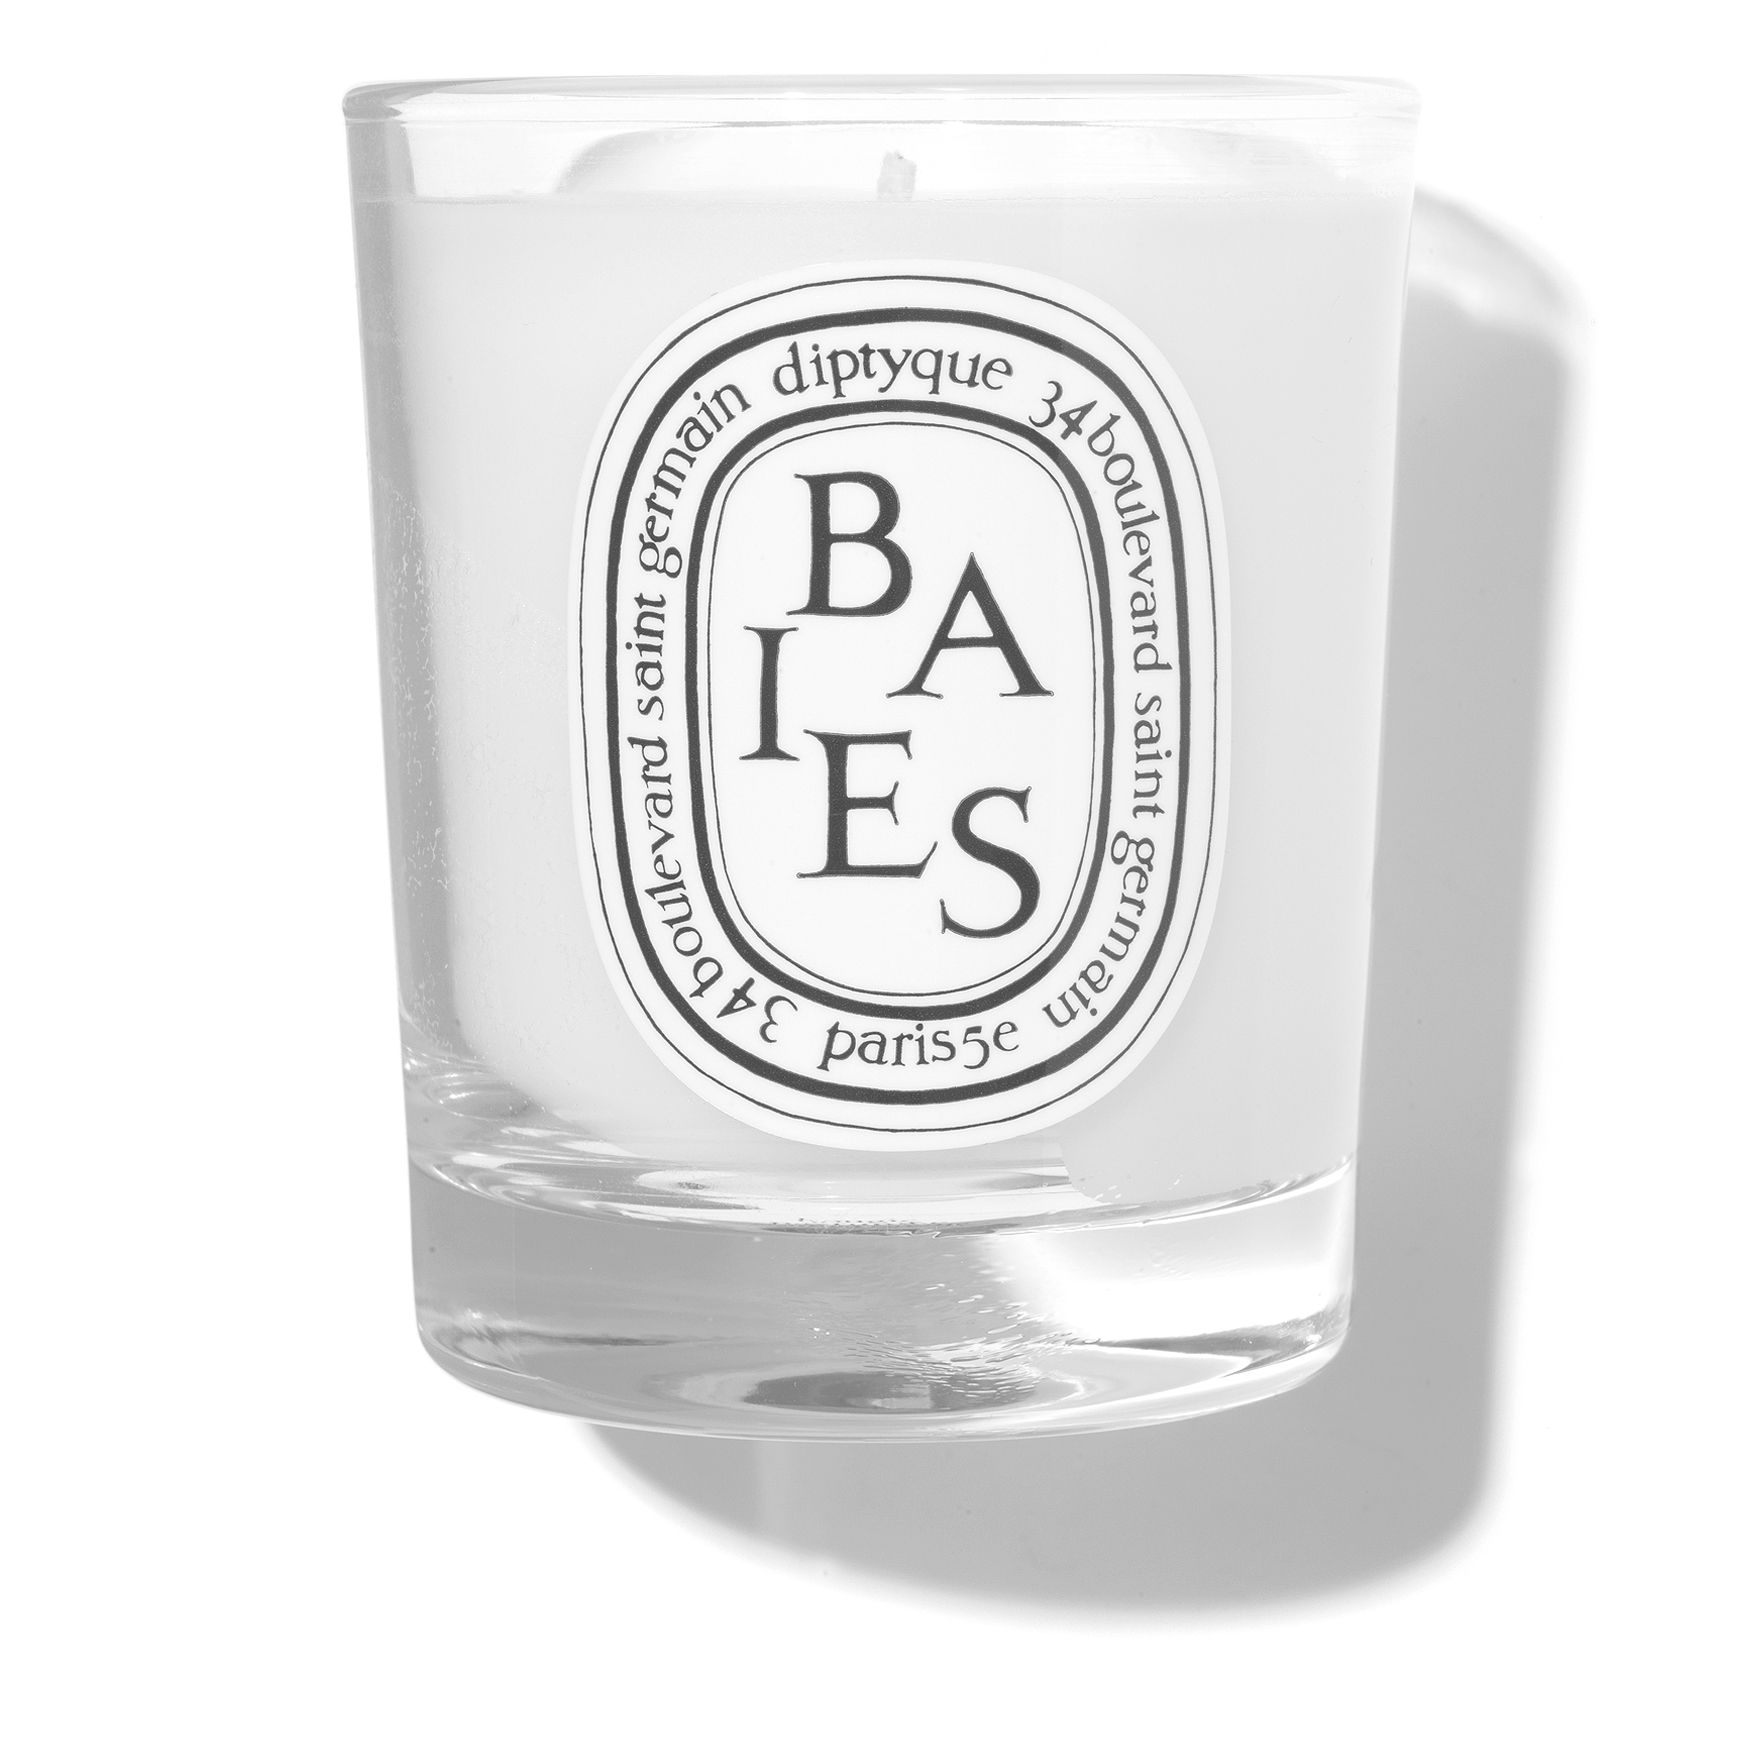 Baies Scented Candle 190g | Space NK - UK